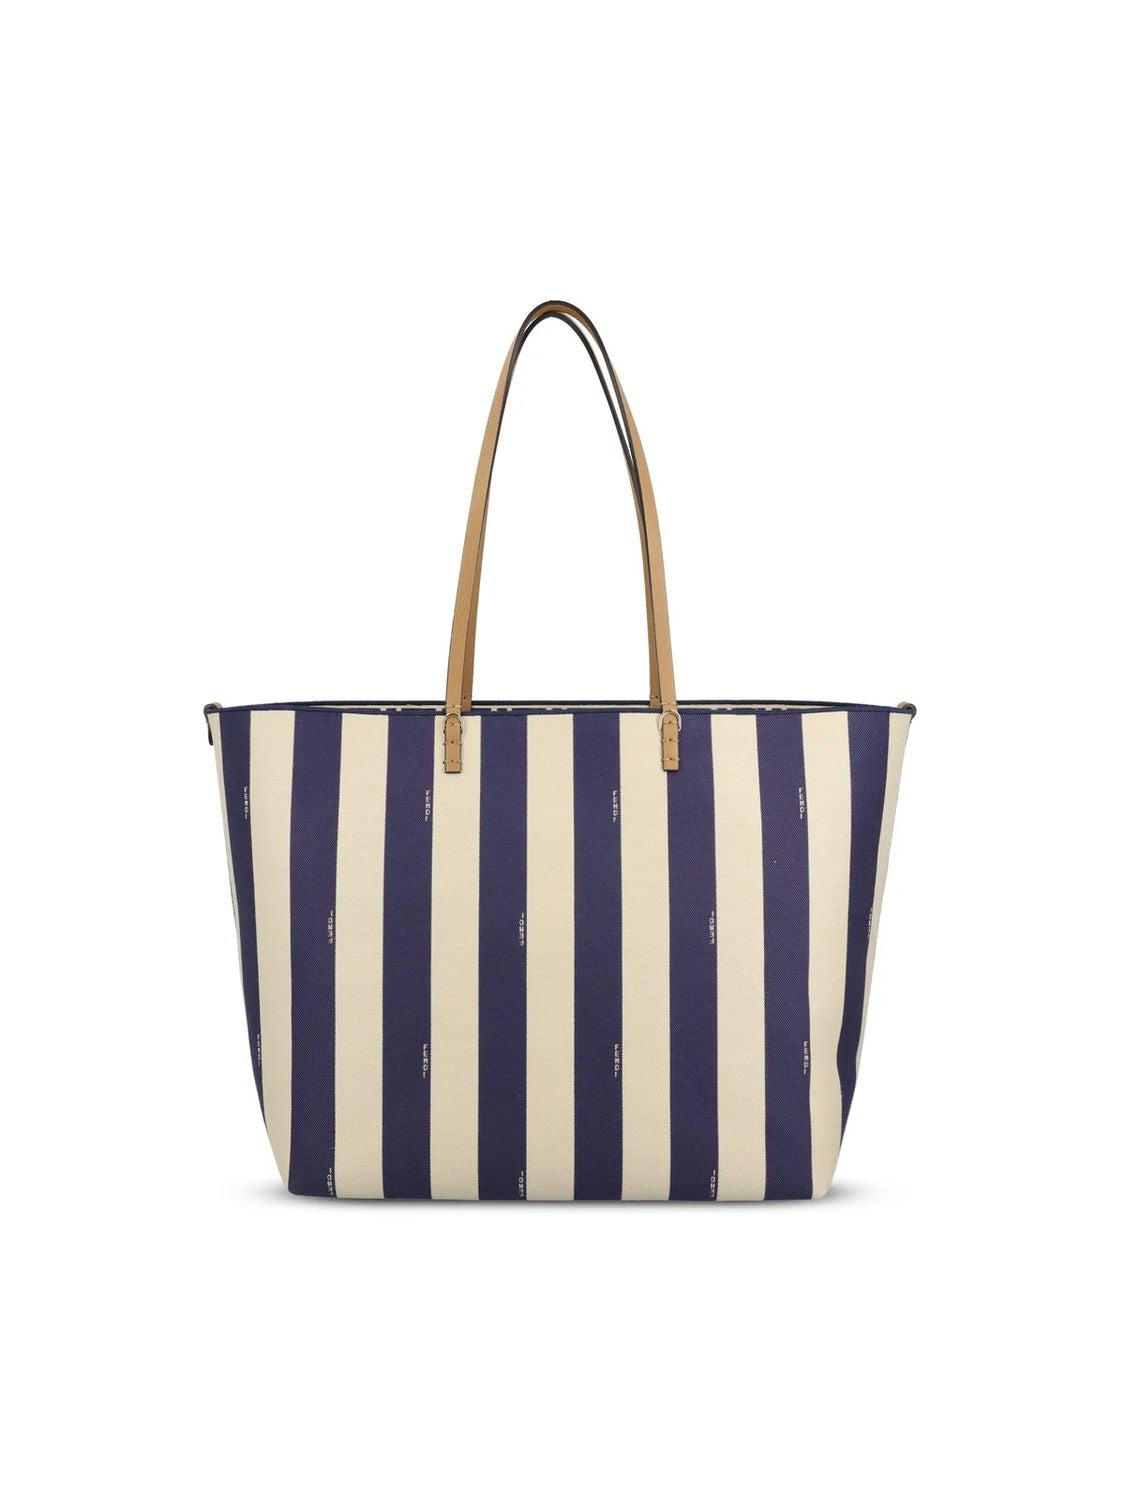 FENDI Reversible Large Striped Navy Jacquard Tote with Leather Accents and Gold-Tone Hardware